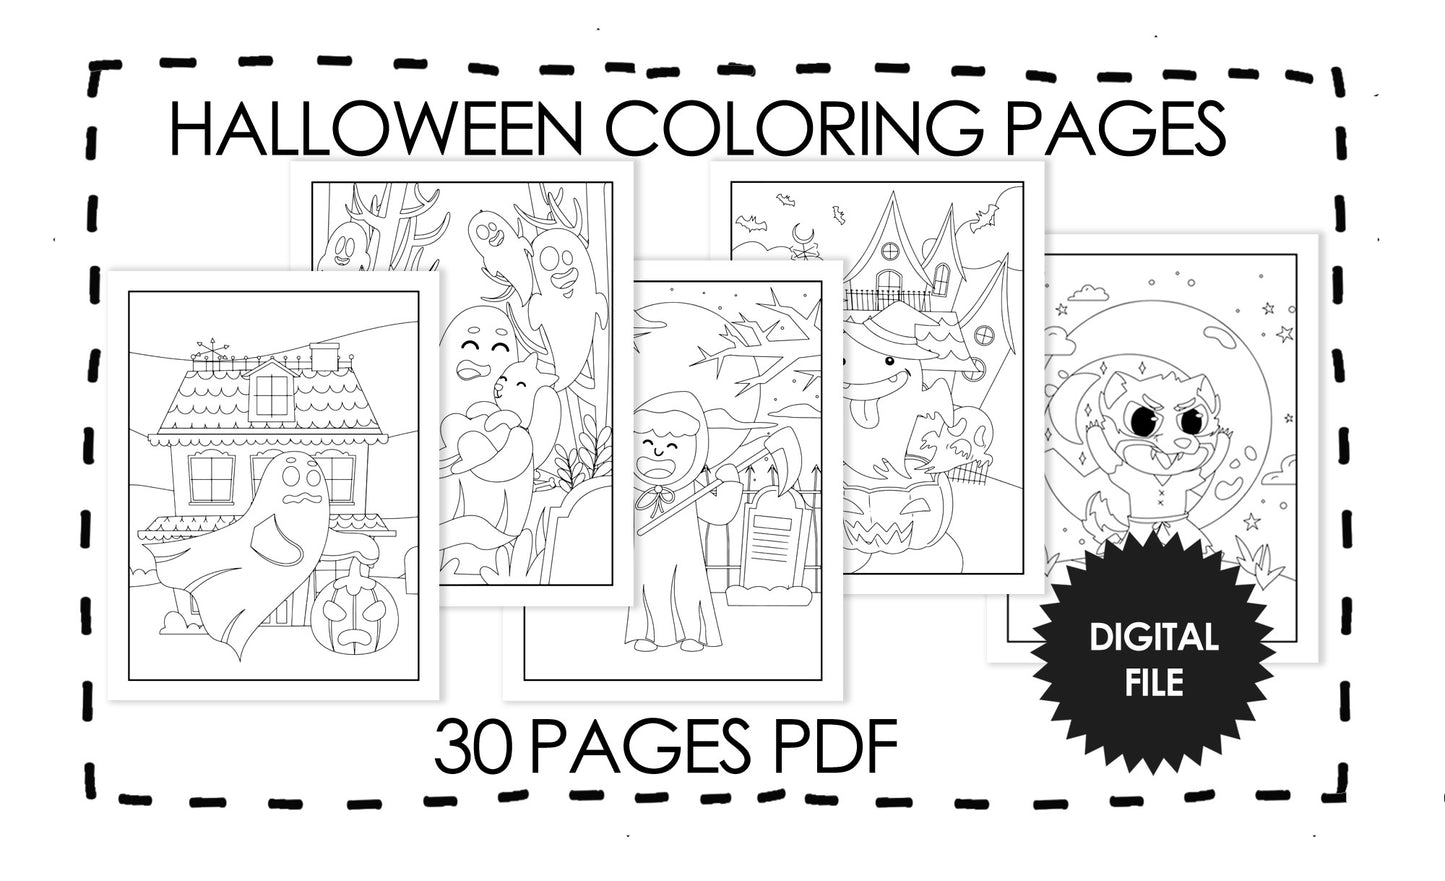 Halloween Coloring Pages For Kids Age 4-8 years 30 Pages, Spooky Season Coloring, Digital Printable Coloring Pages, Instant Download 1 PDF